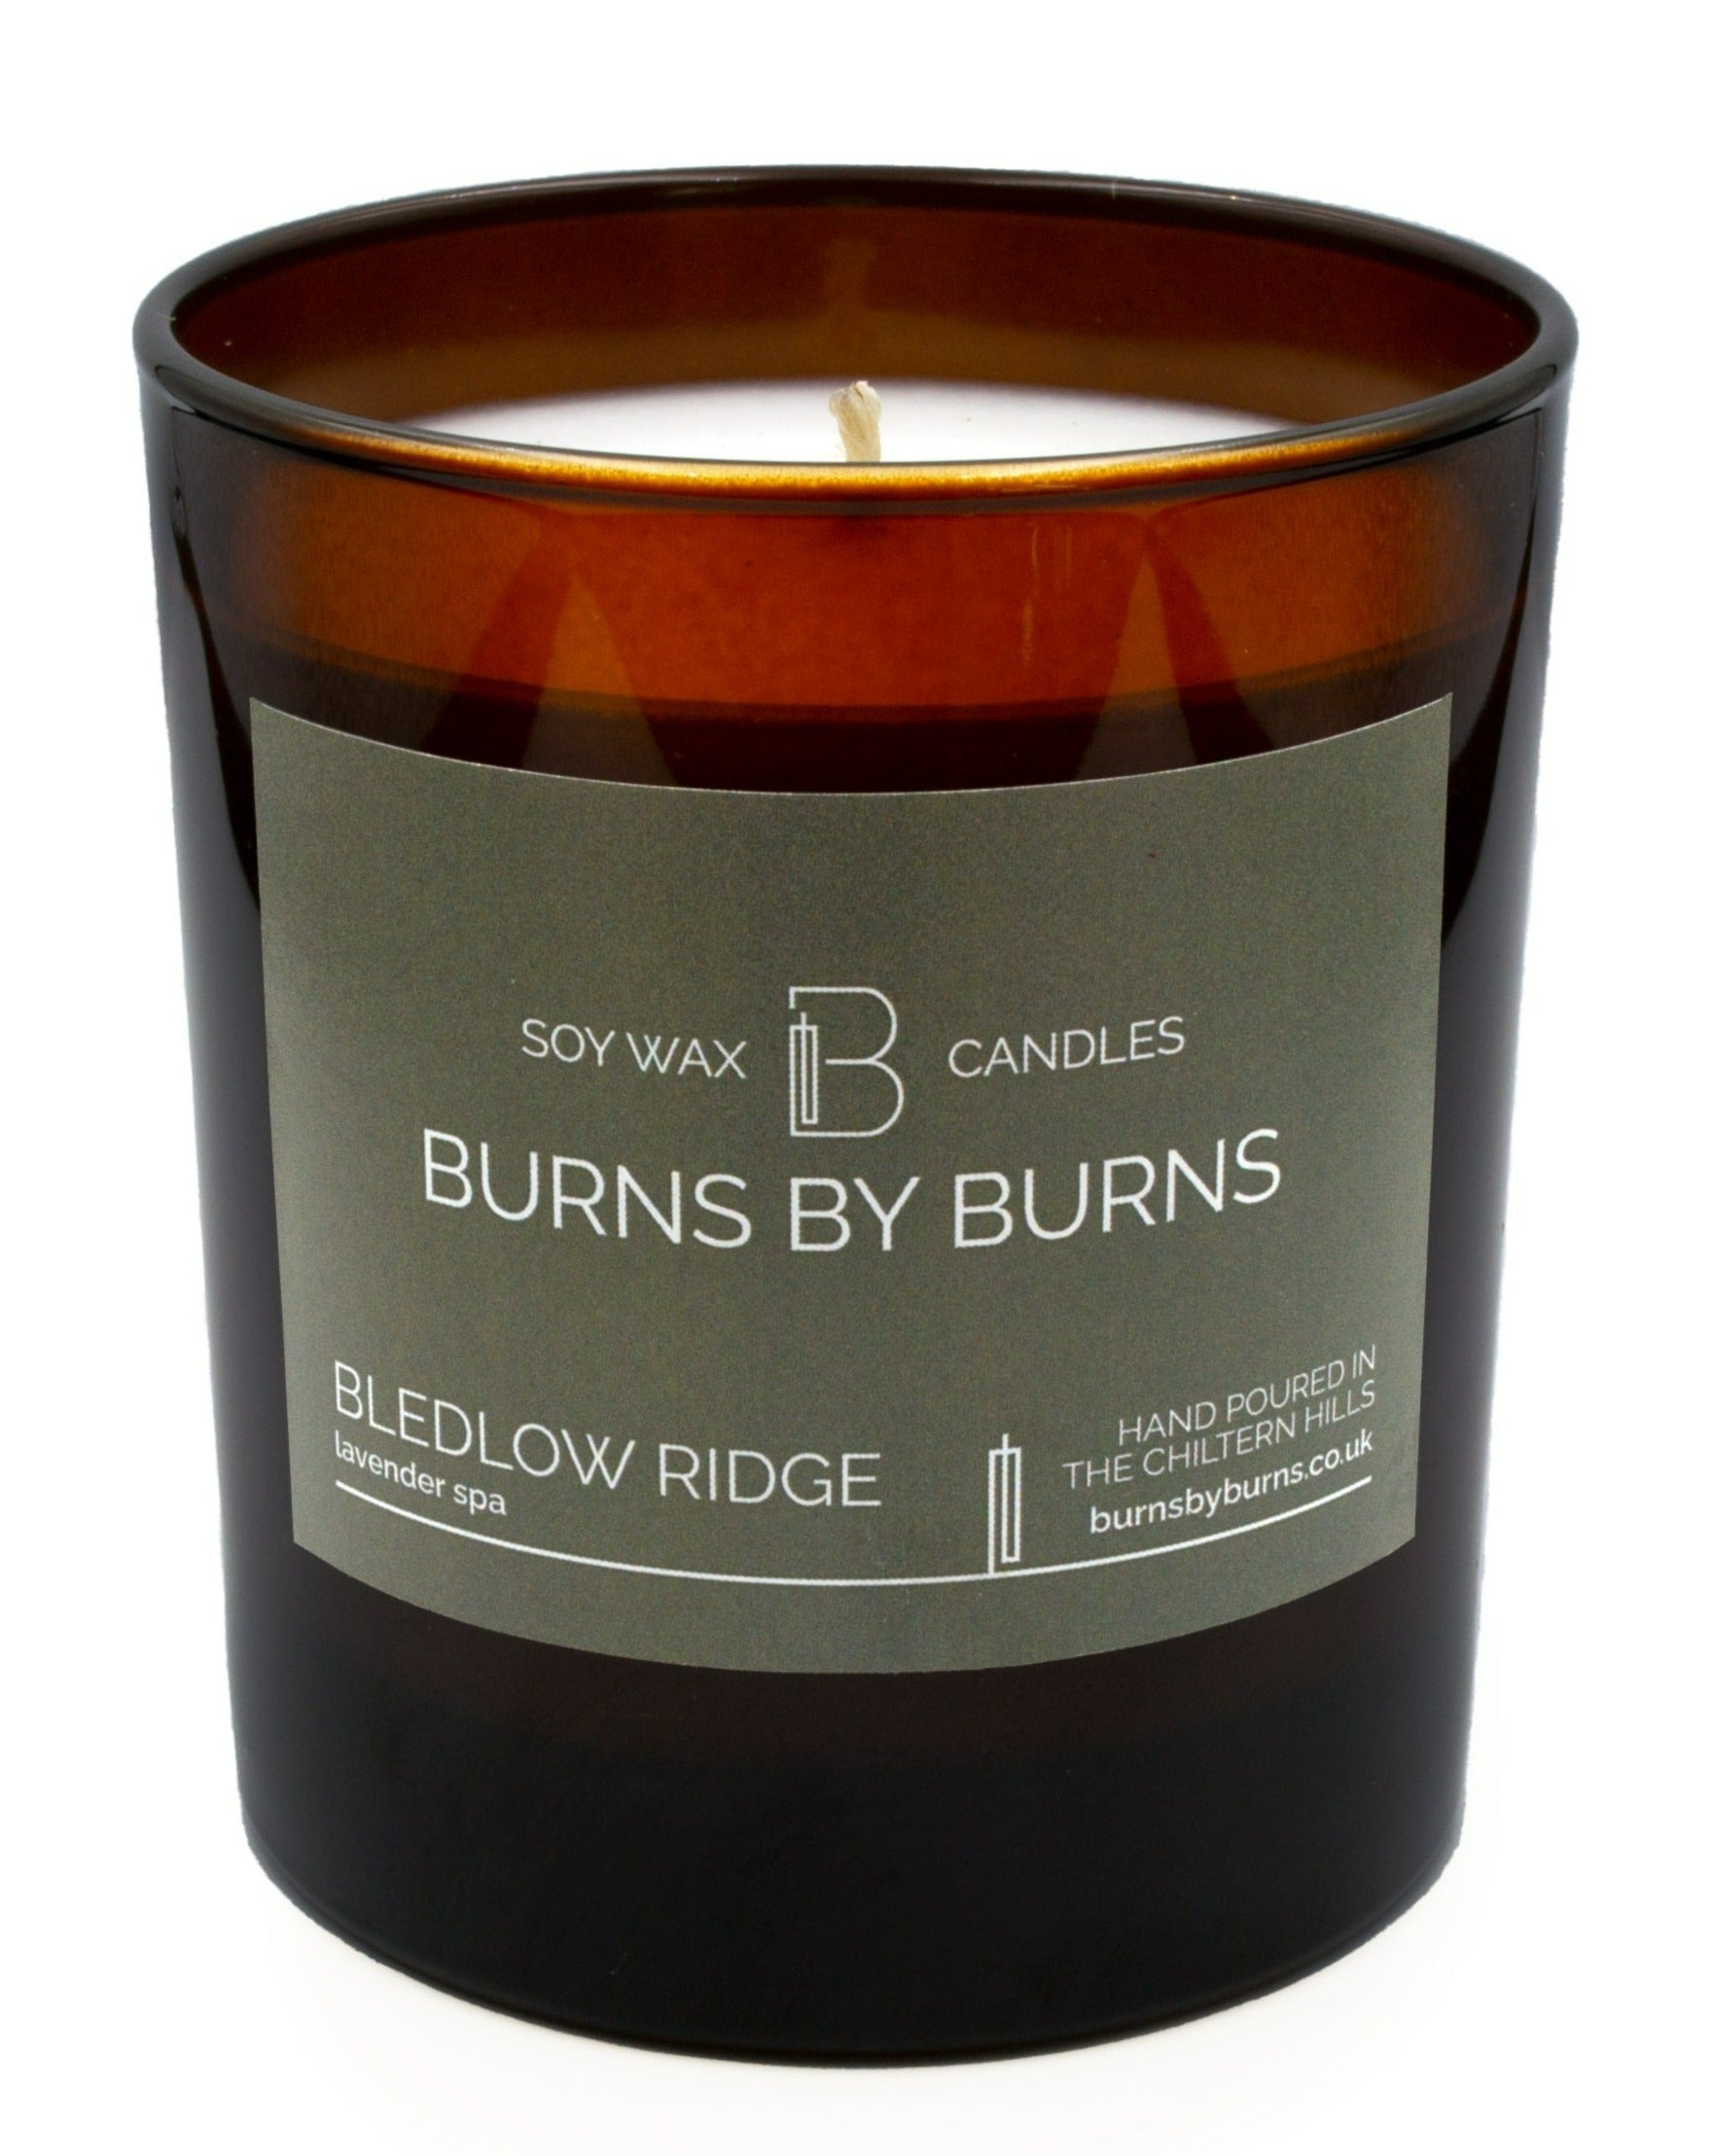 Bledlow Ridge Lavender Spa Soy Scented candle in amber jar